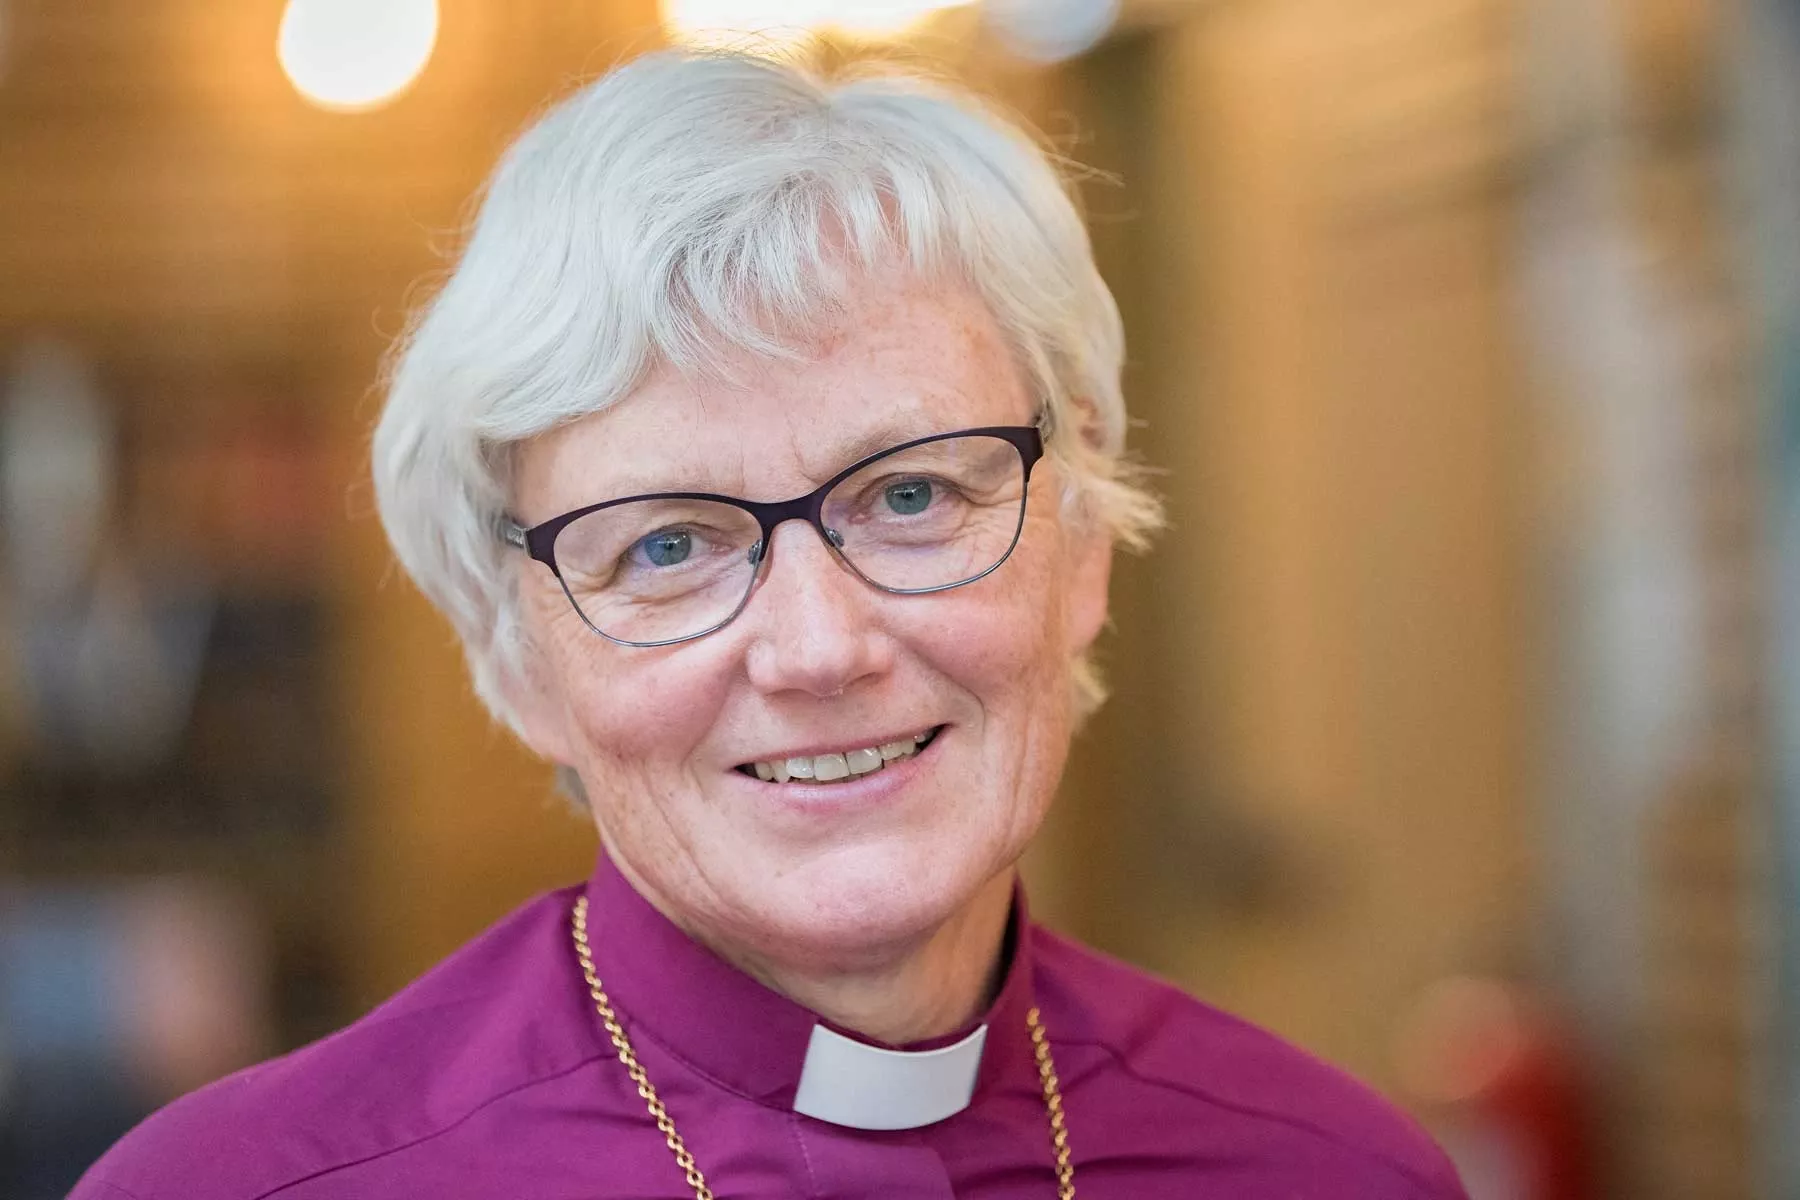 Outgoing Church of Sweden Archbishop Antje Jackelén who stepped down from her leadership role on 30 October. Photo: LWF/Albin Hillert